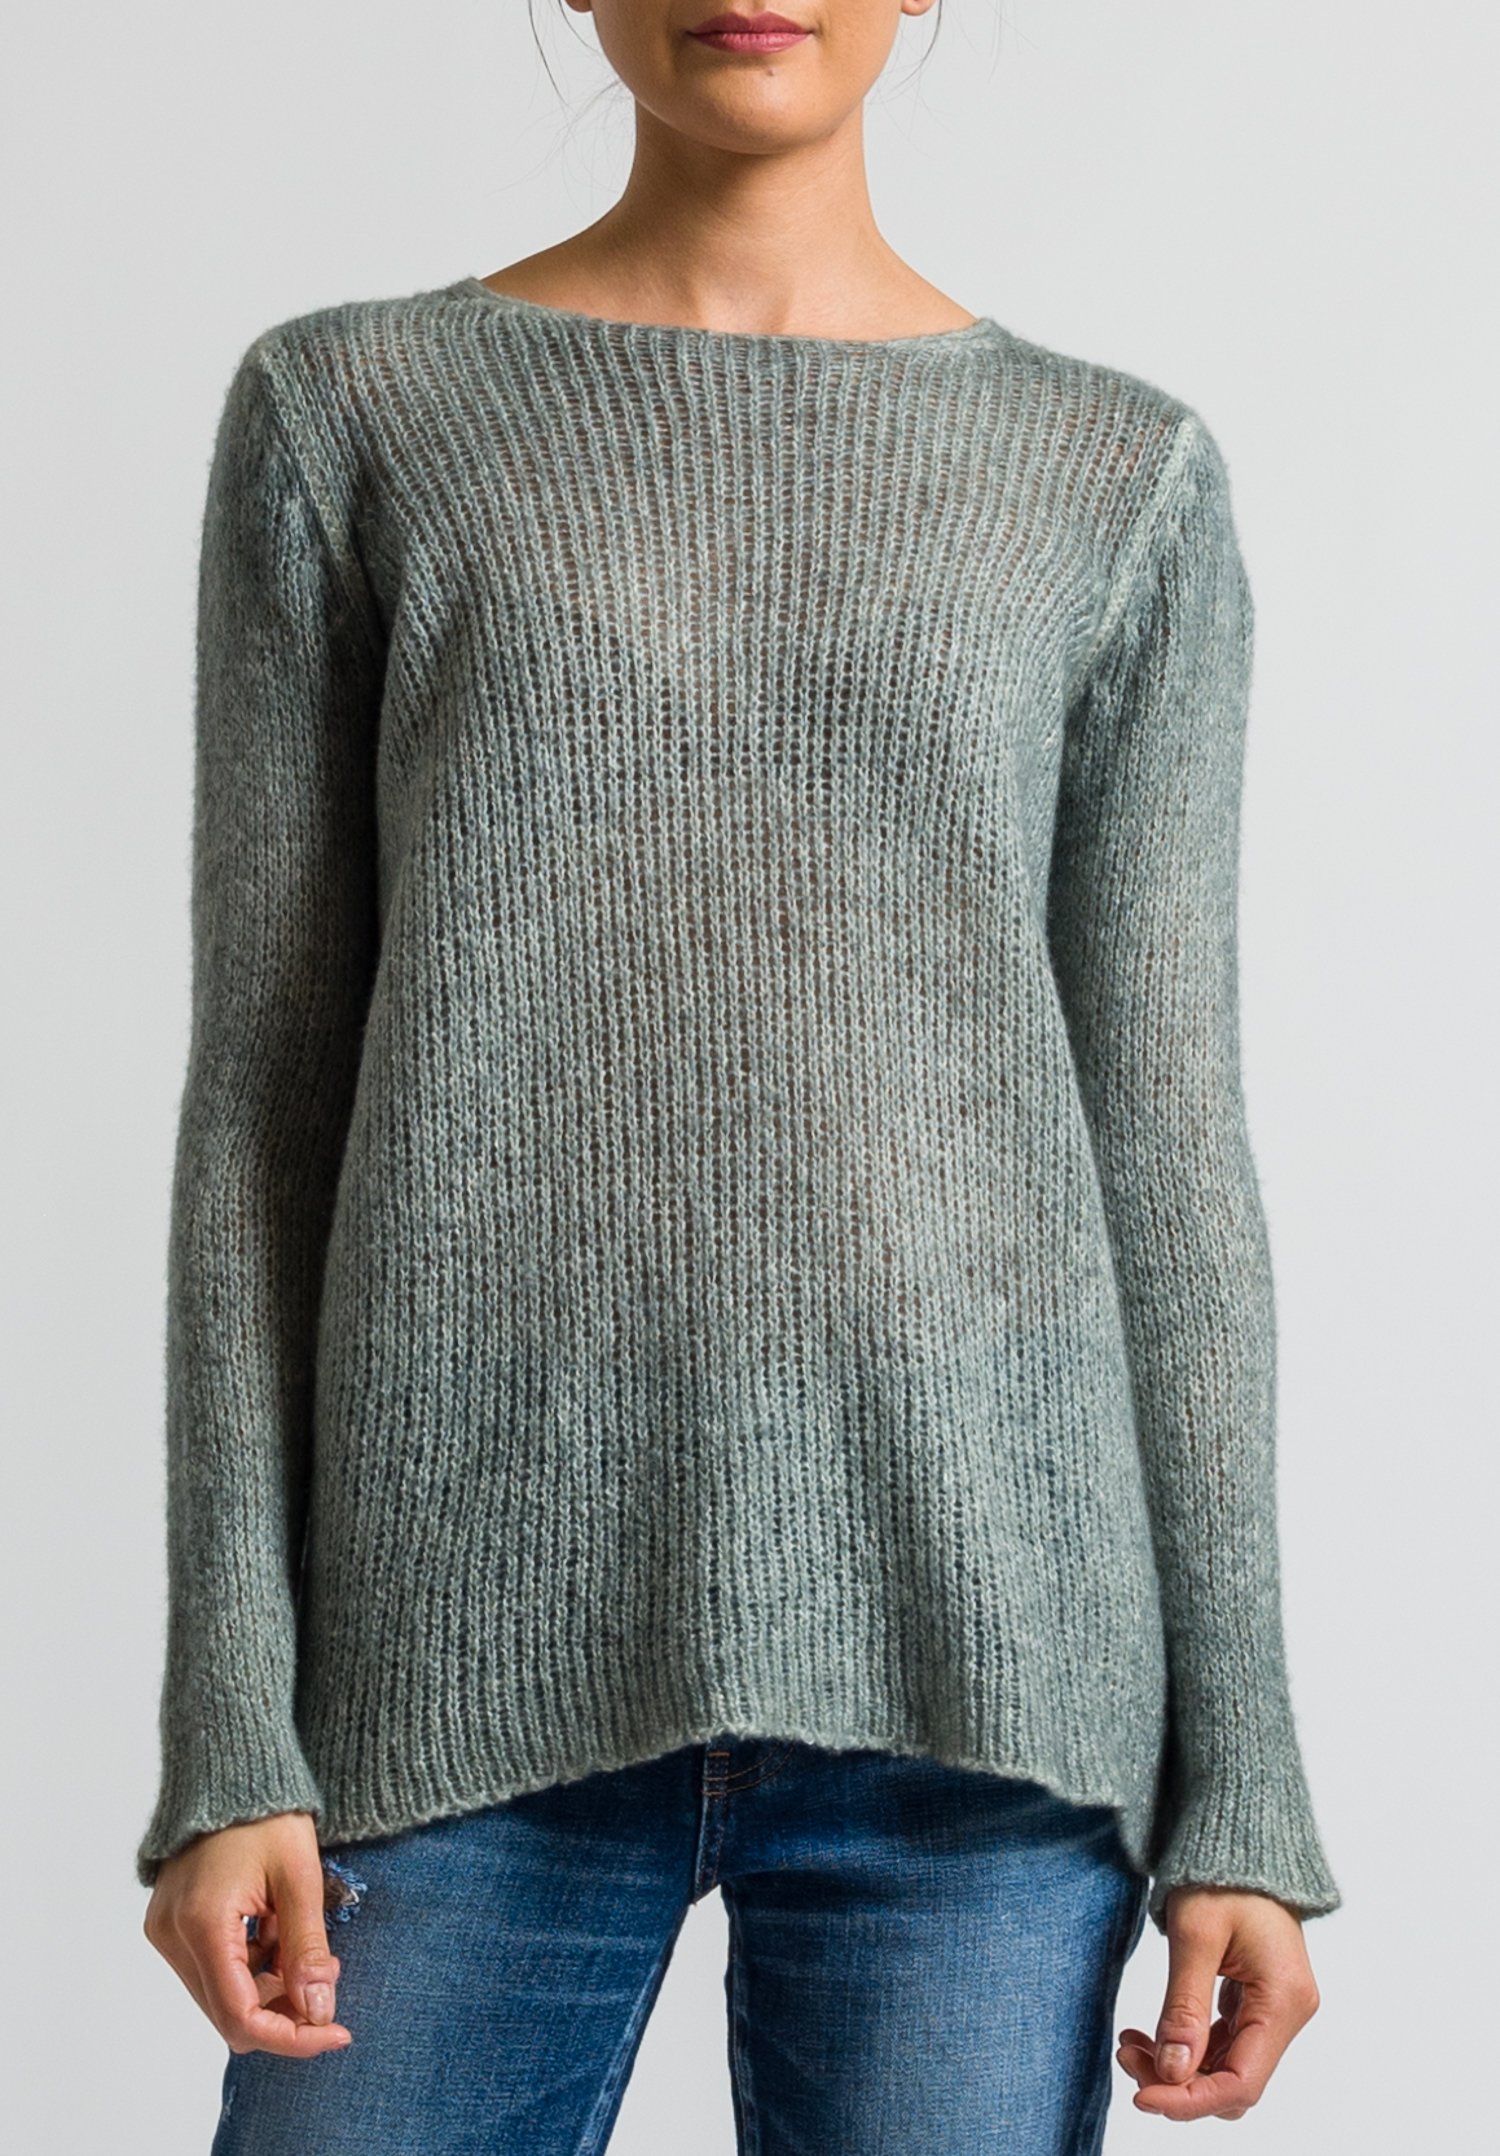 Avant Toi Loose Knit Relaxed Sweater in Salice | Santa Fe Dry Goods ...